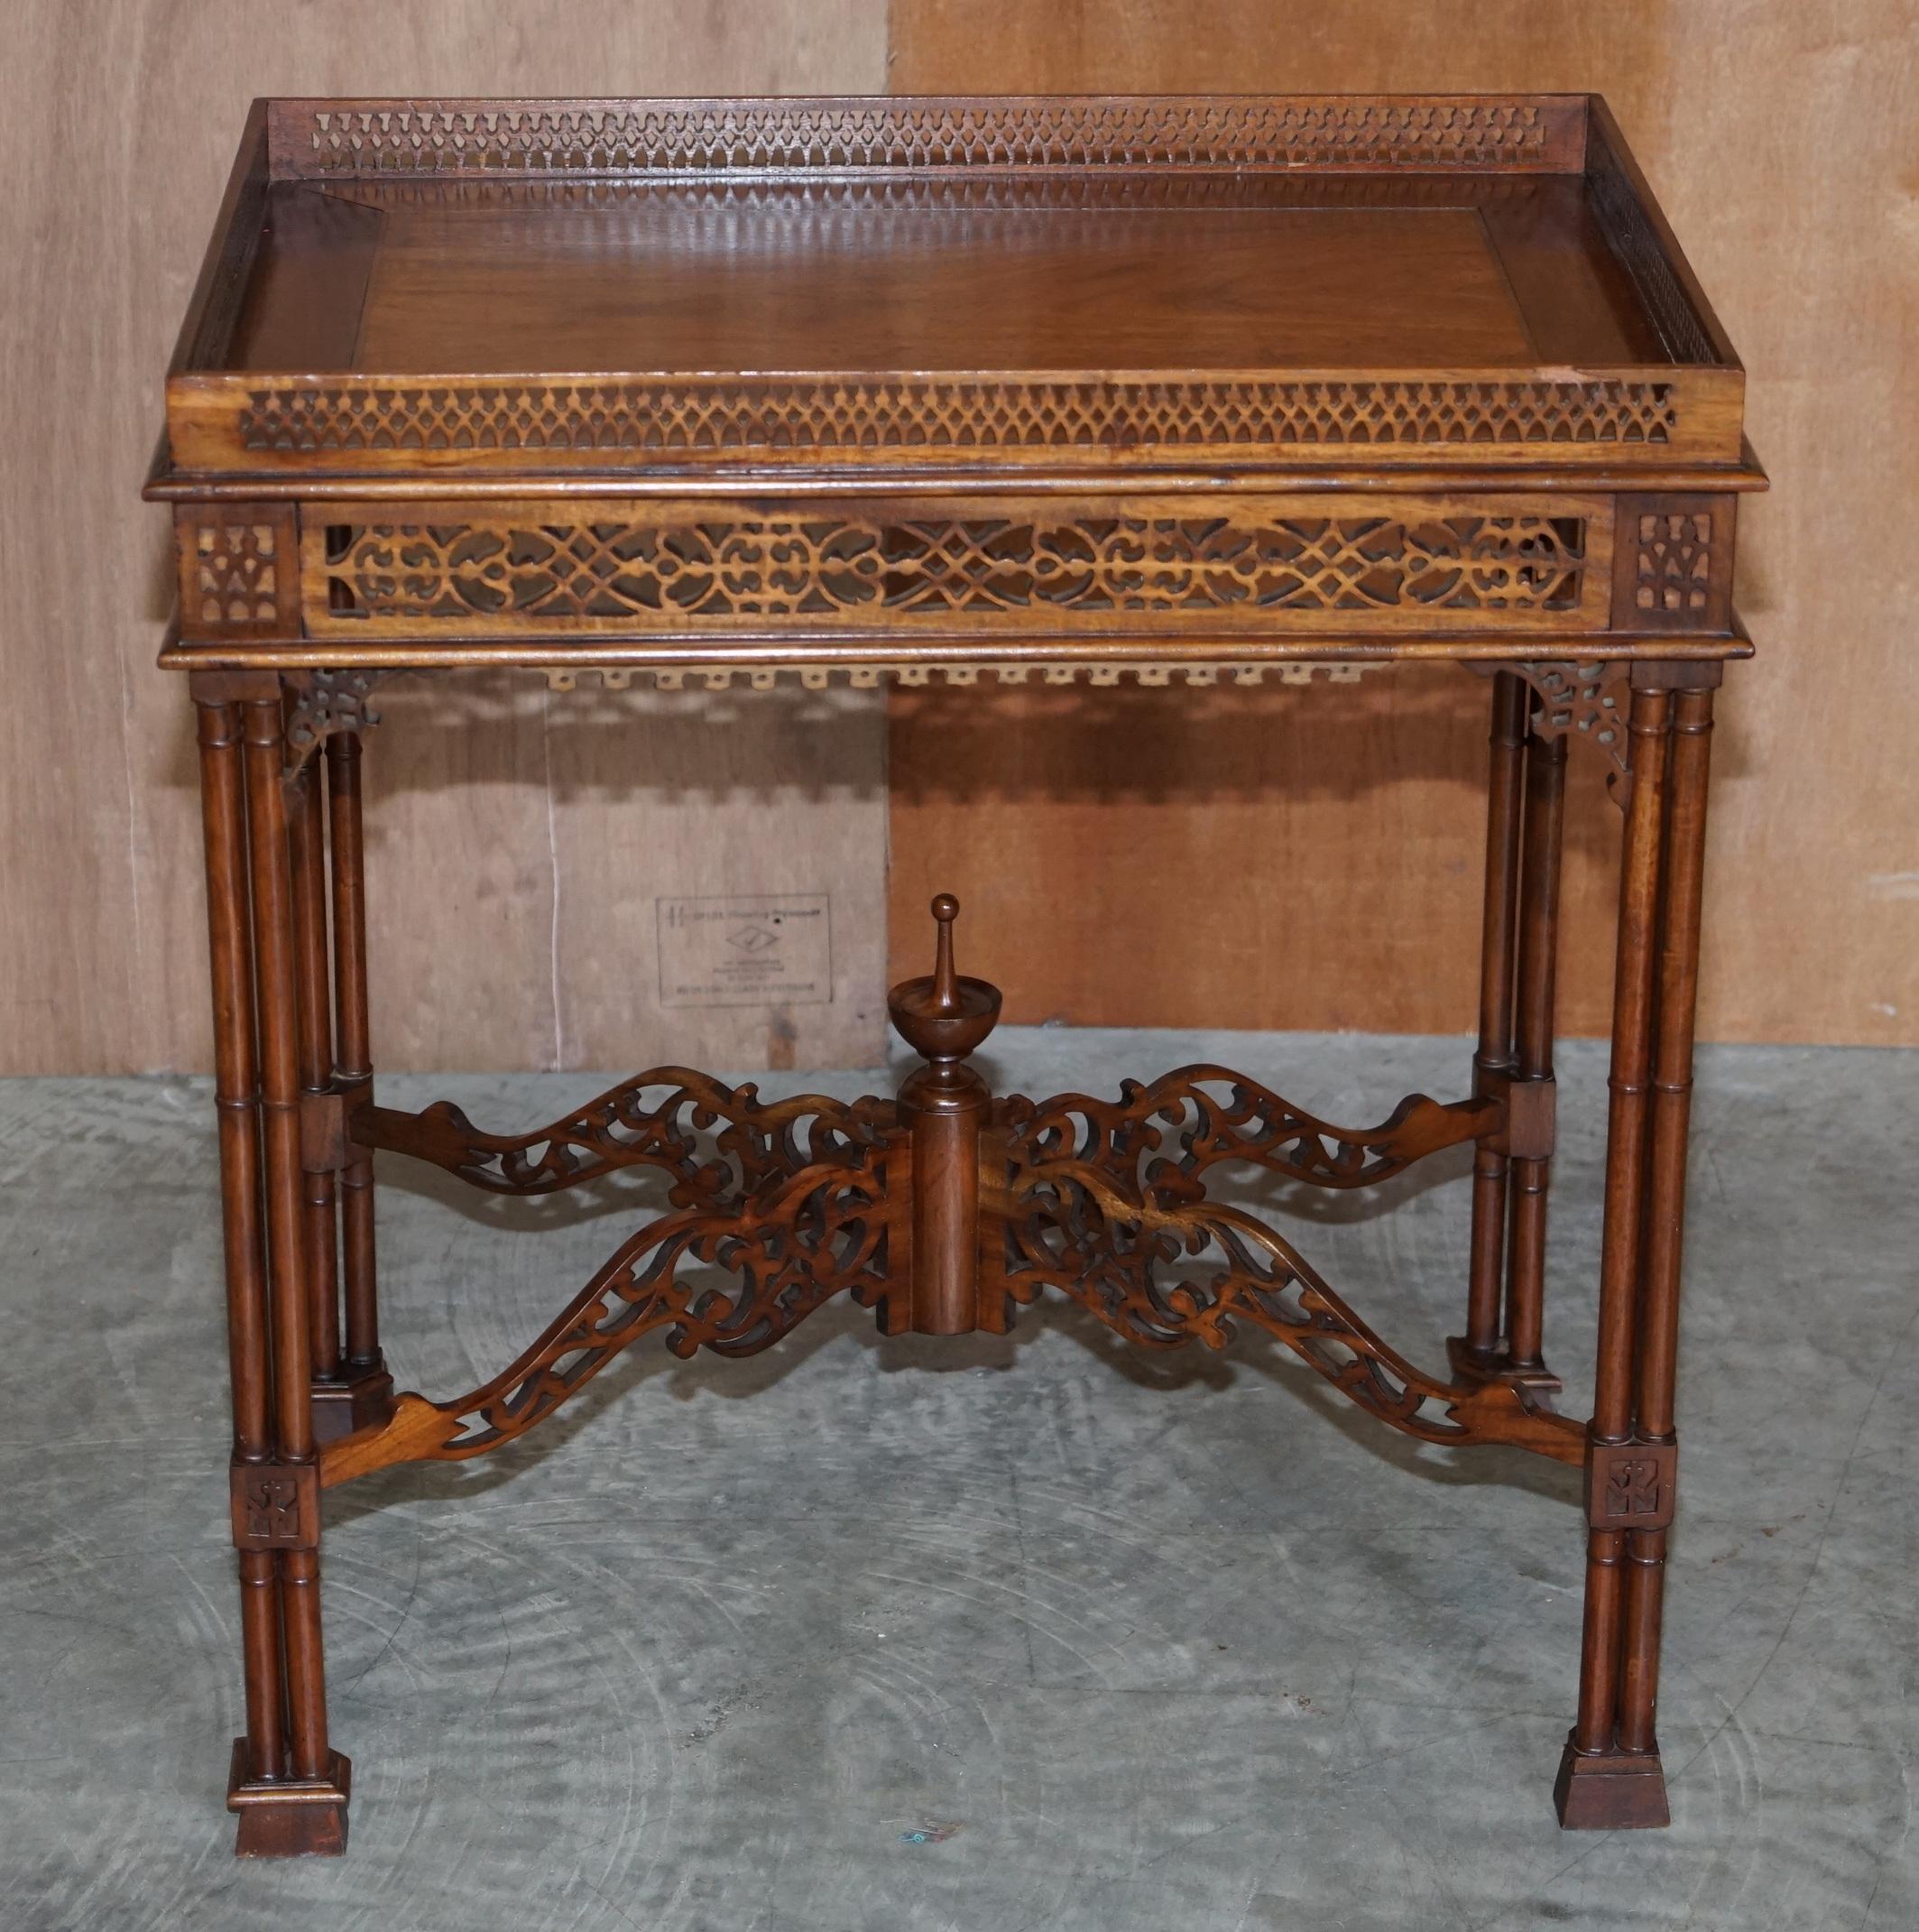 We are delighted to offer for sale this very rare Thomas Chippendale style, Fret work carved, occasional silver tea table in Mahogany

This table is stunning, I would say mid to late 19th, the timber patina is exquisite as is the carving, the